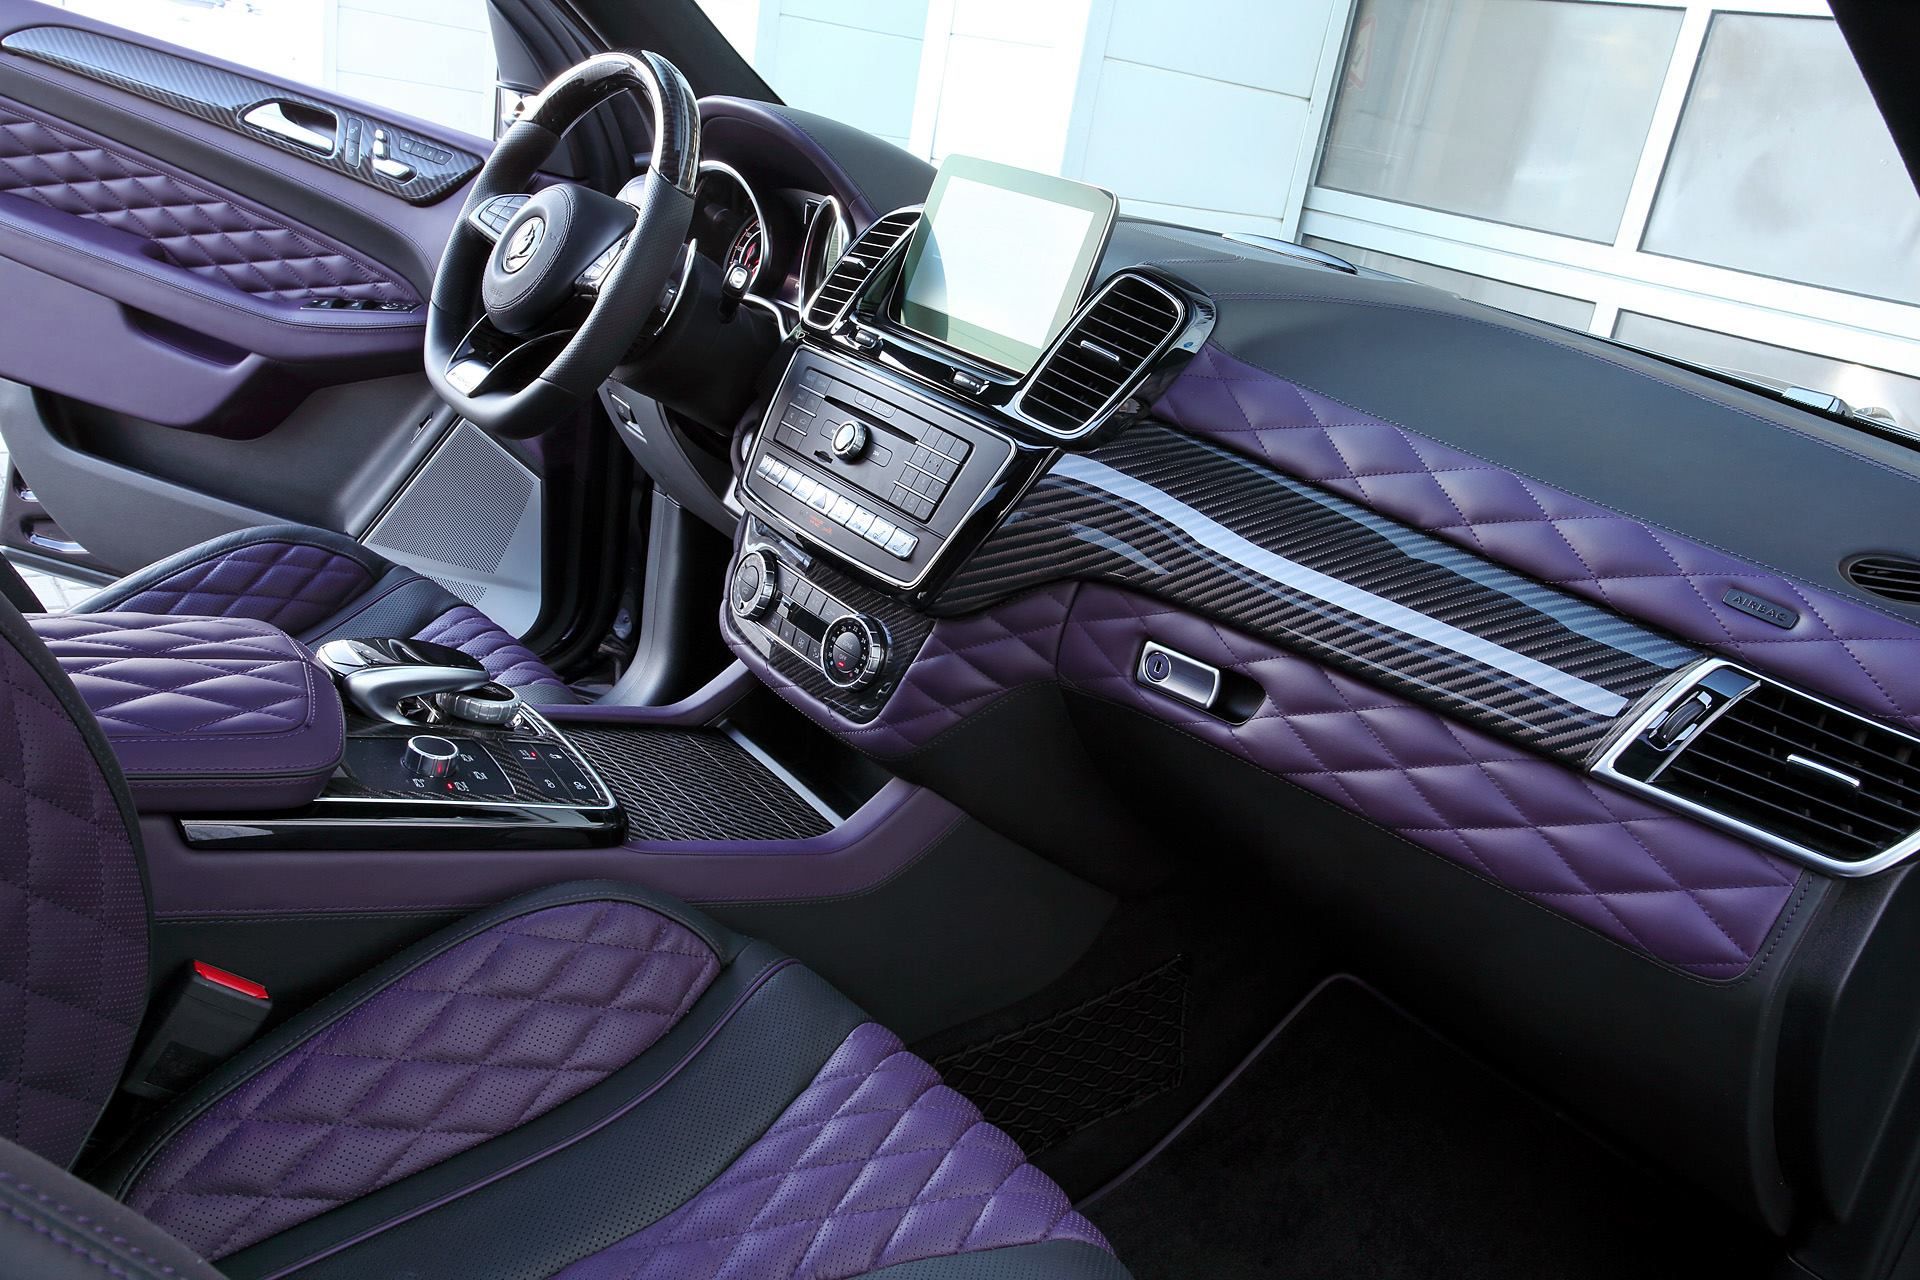 Carbon Mercedes Amg Gle 63 By Topcar Has Purple Leather